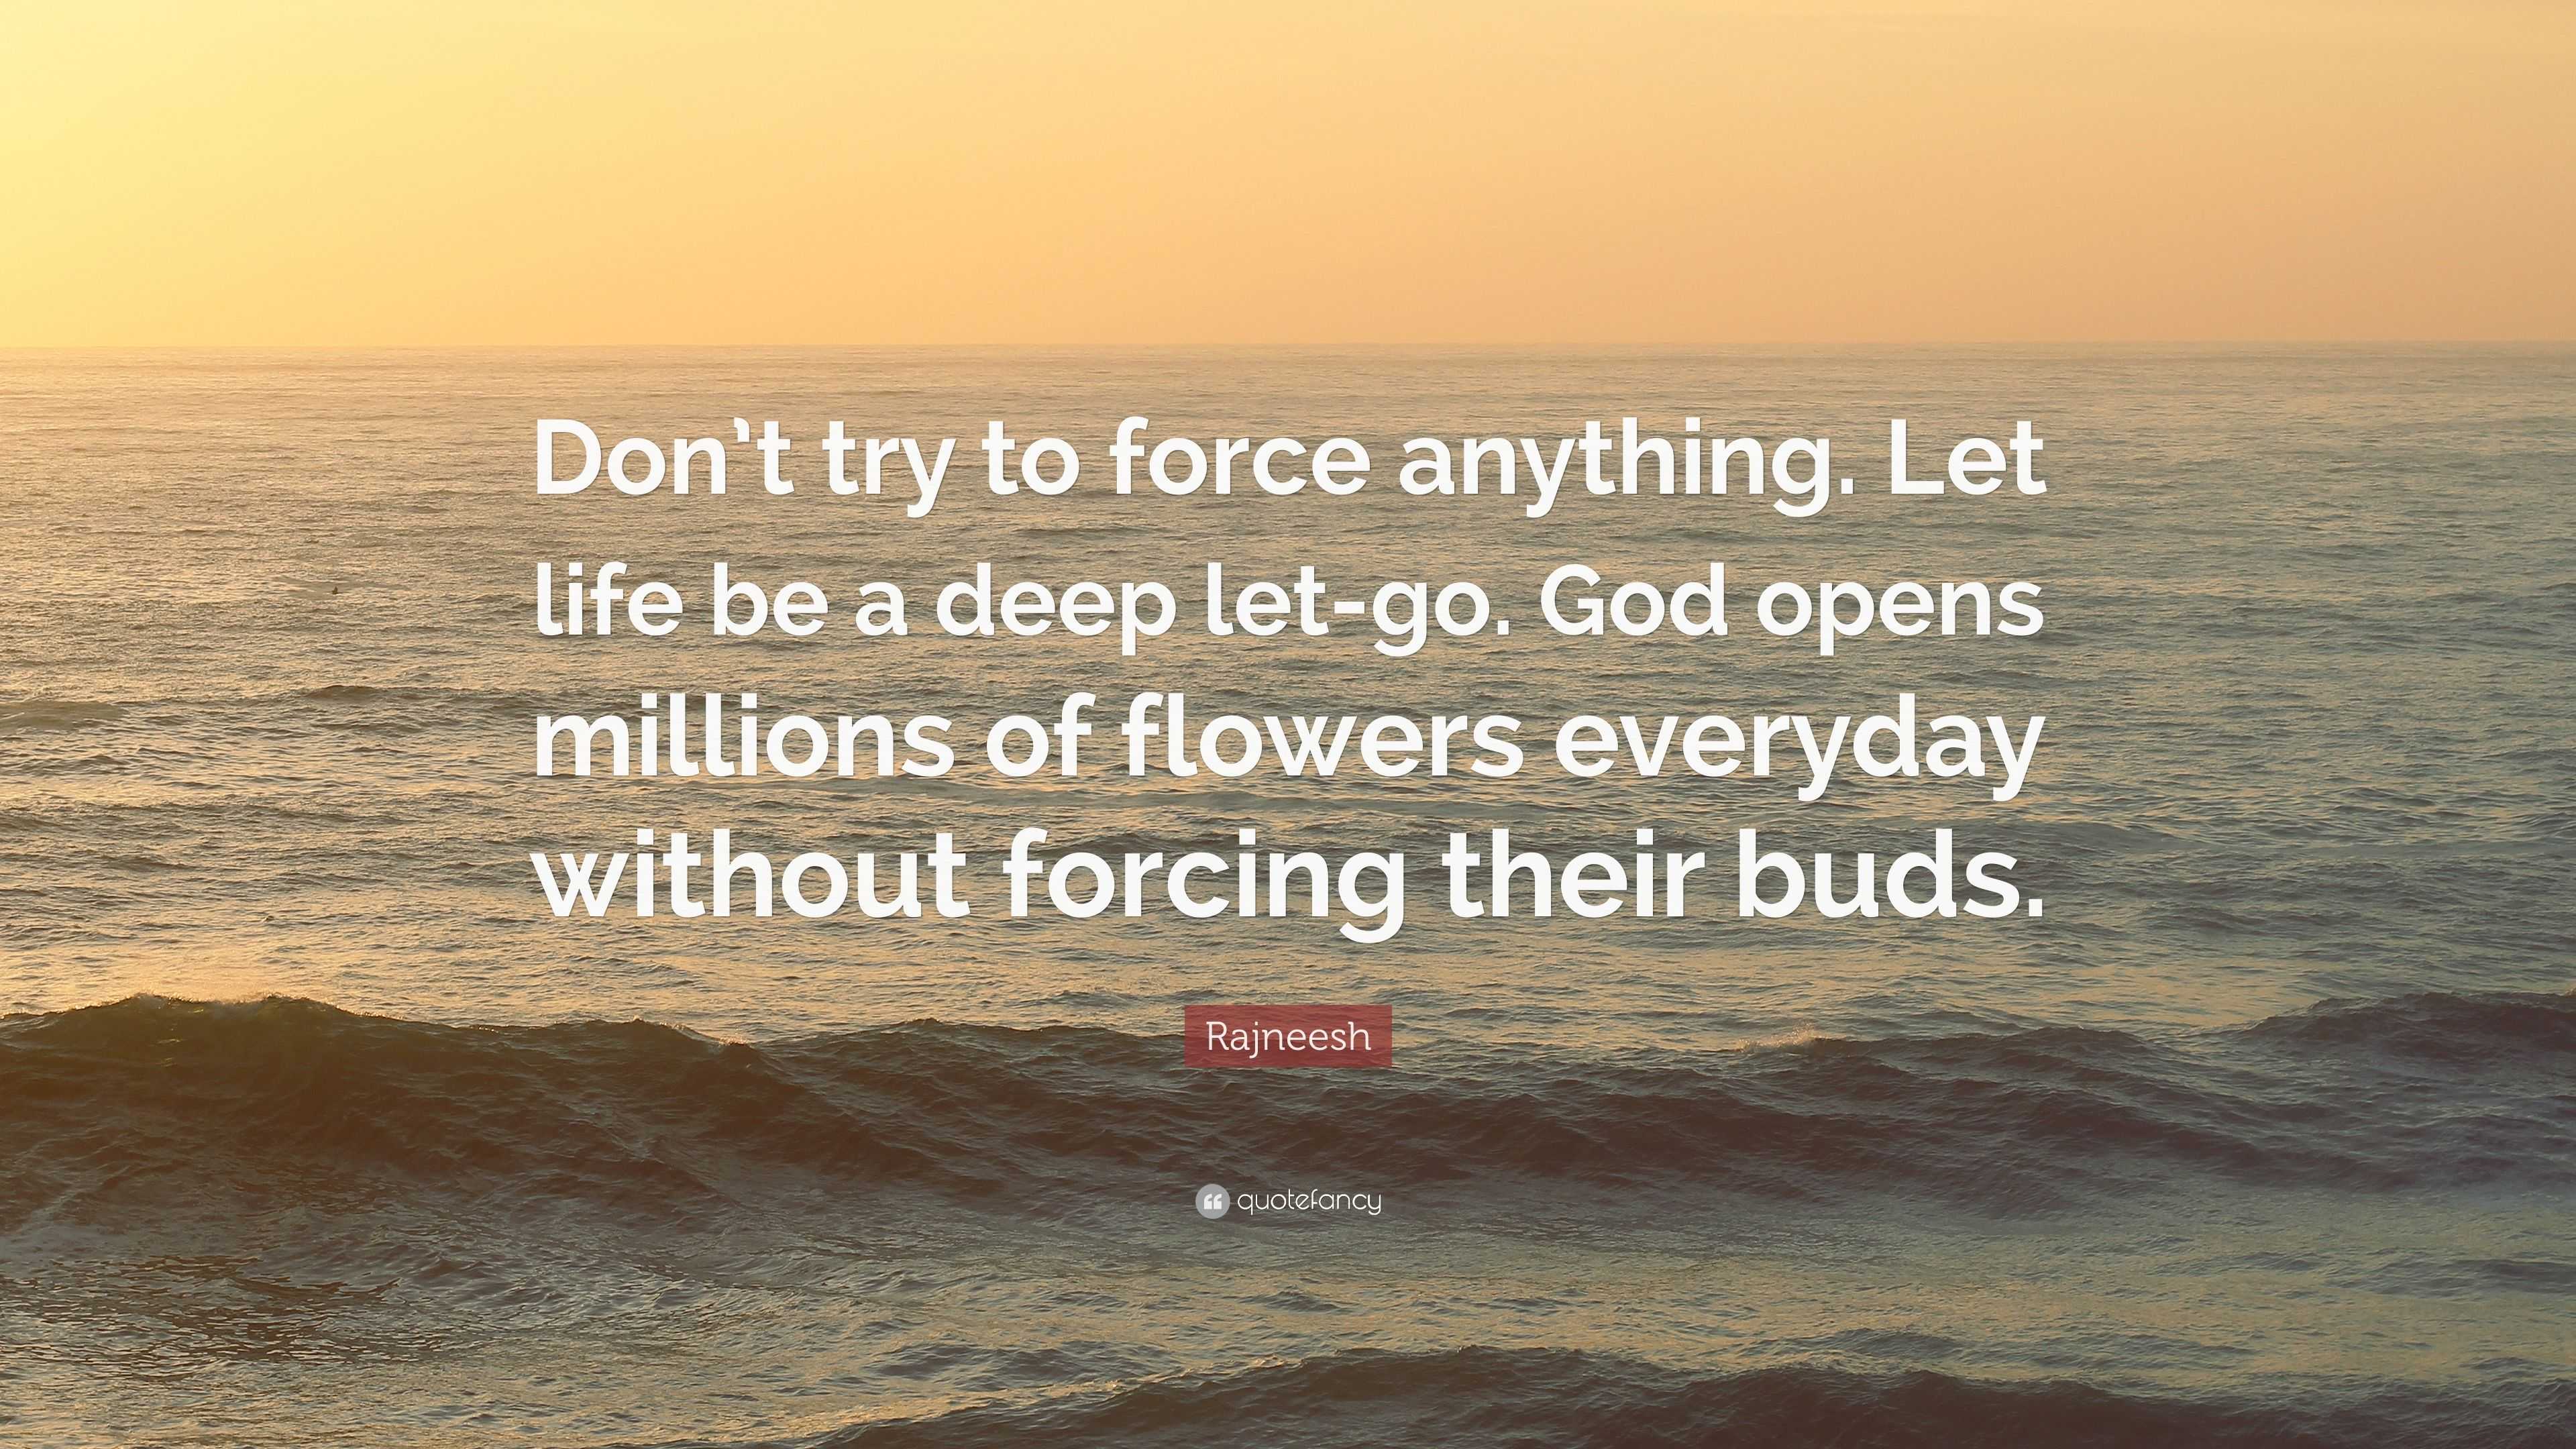 Rajneesh Quote: “Don’t try to force anything. Let life be a deep let-go